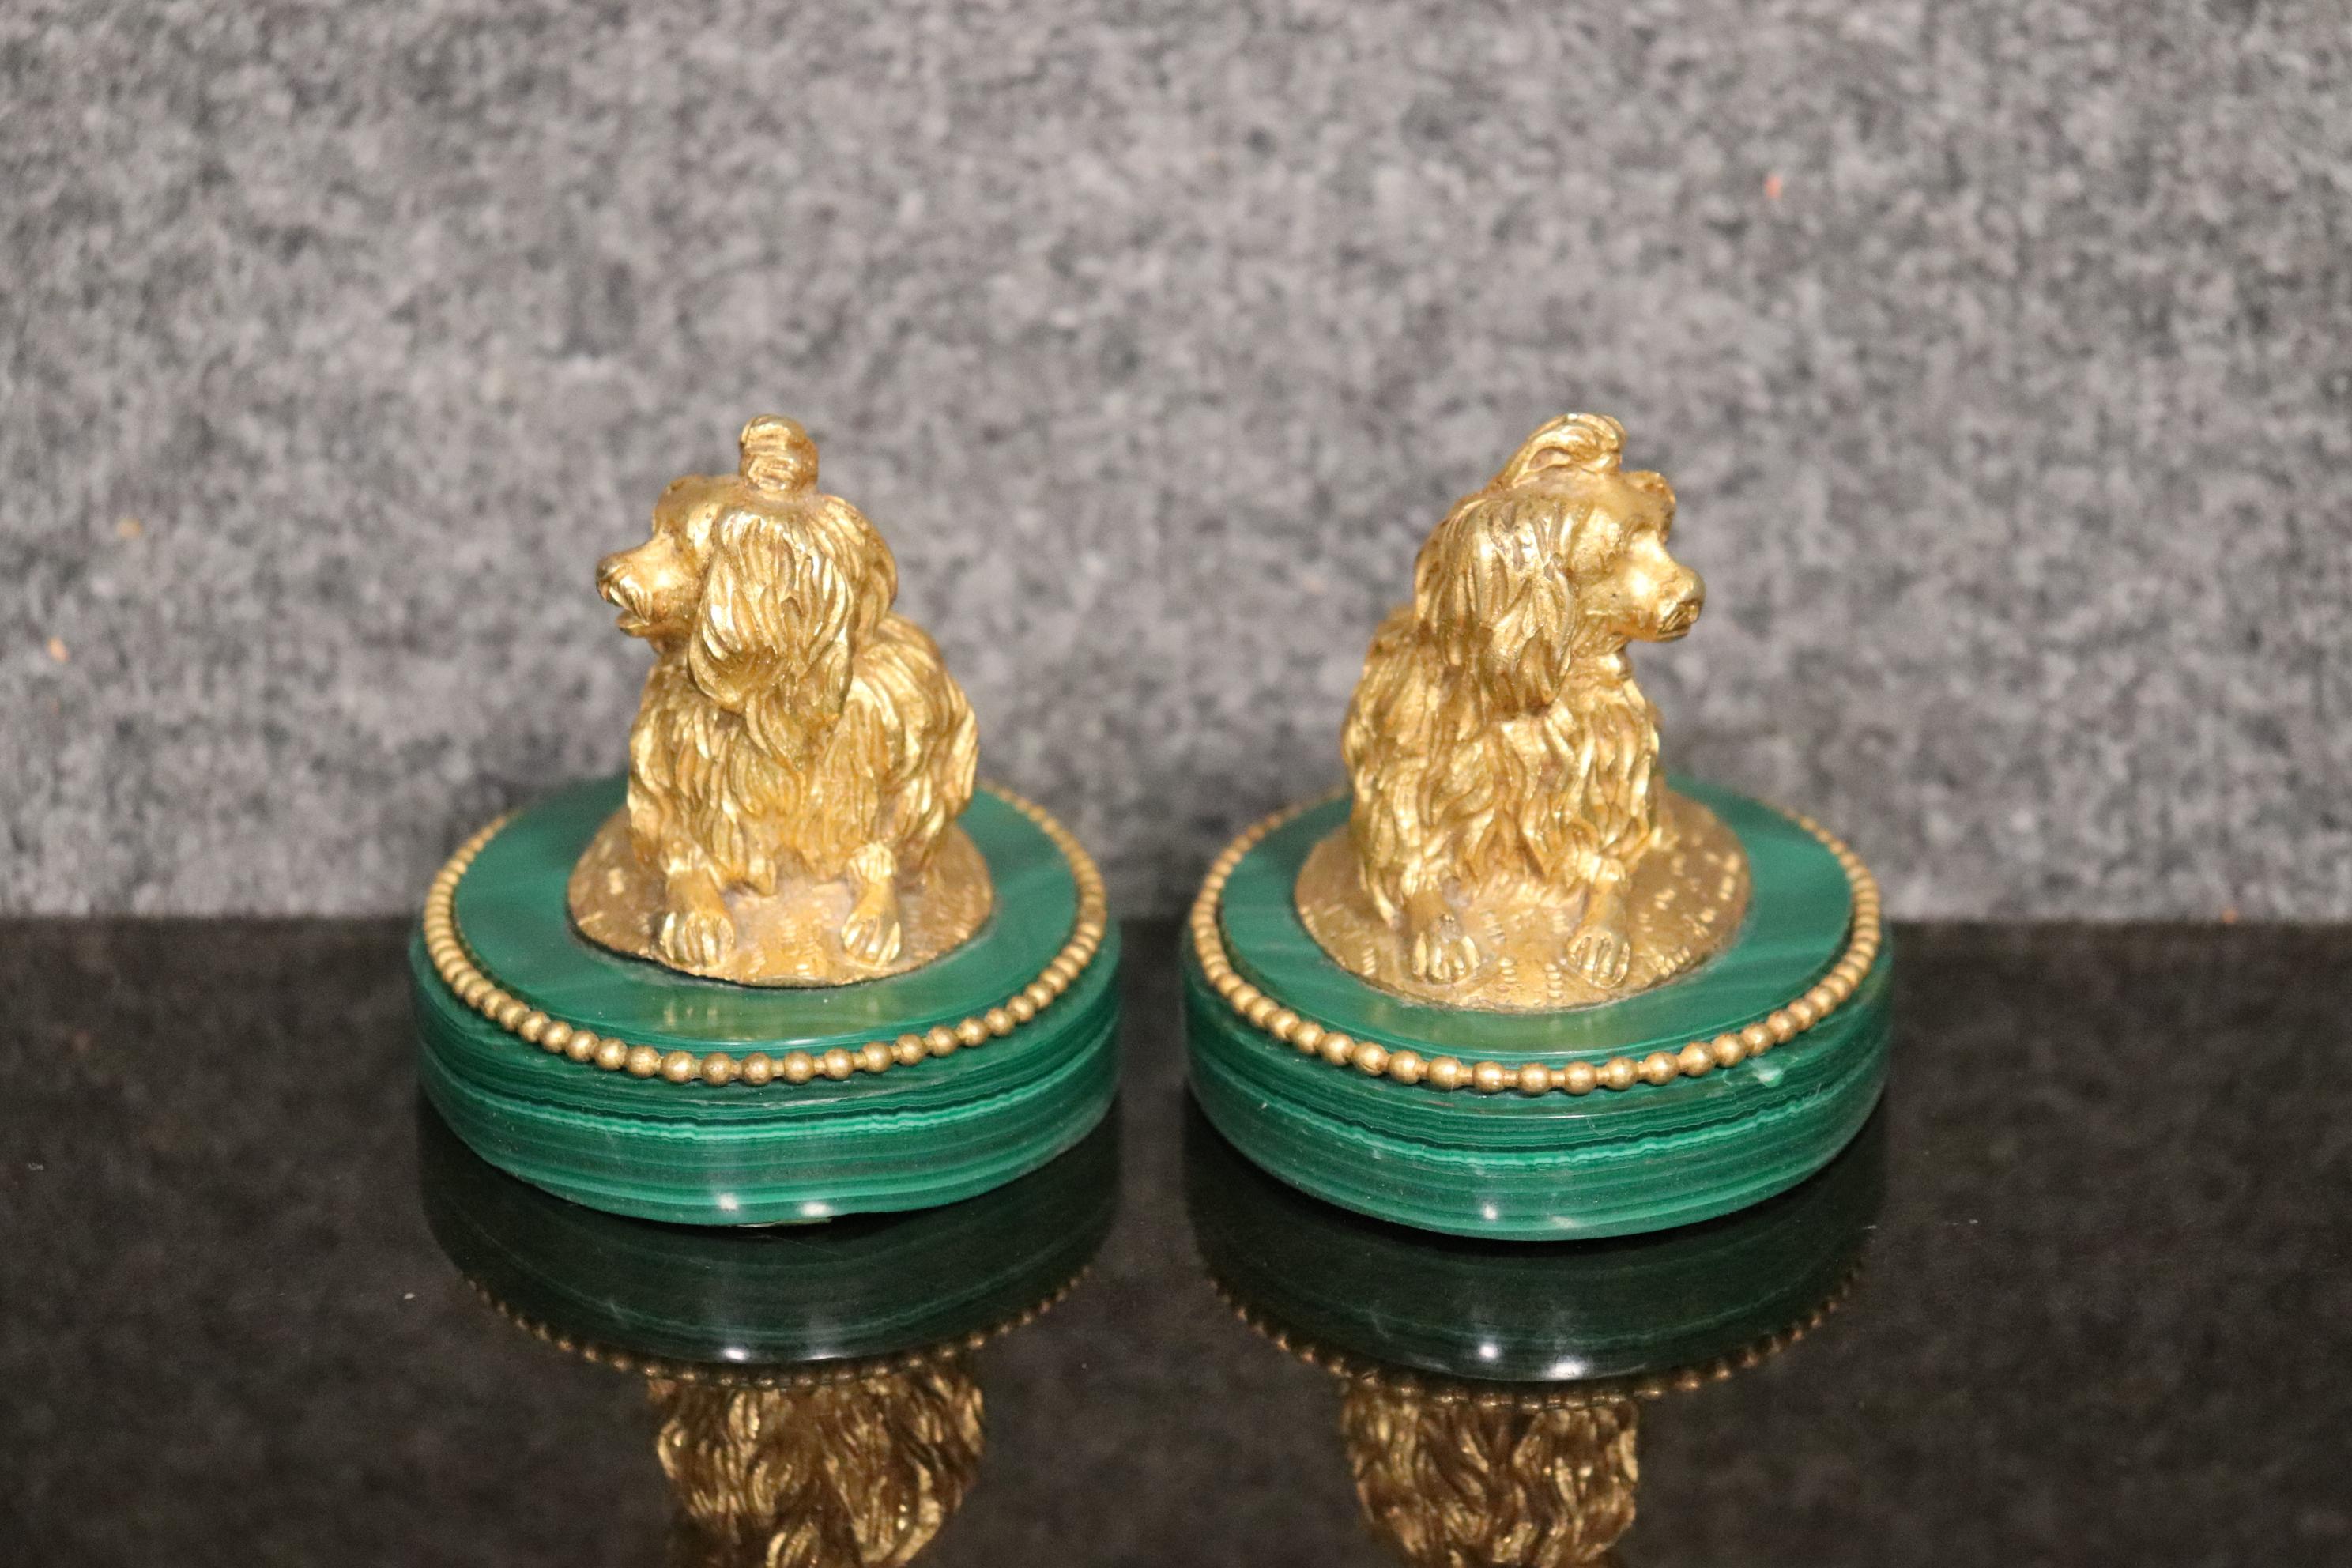 Dimensions- H: 3in W: 4 1/4in D: 2 7/8in
This exceptional pair of French Doré bronze dogs on malachite plinths/bases are an amazing example of high quality antique smalls. Finding a pair in this good of condition is highly uncommon. Malachite Was